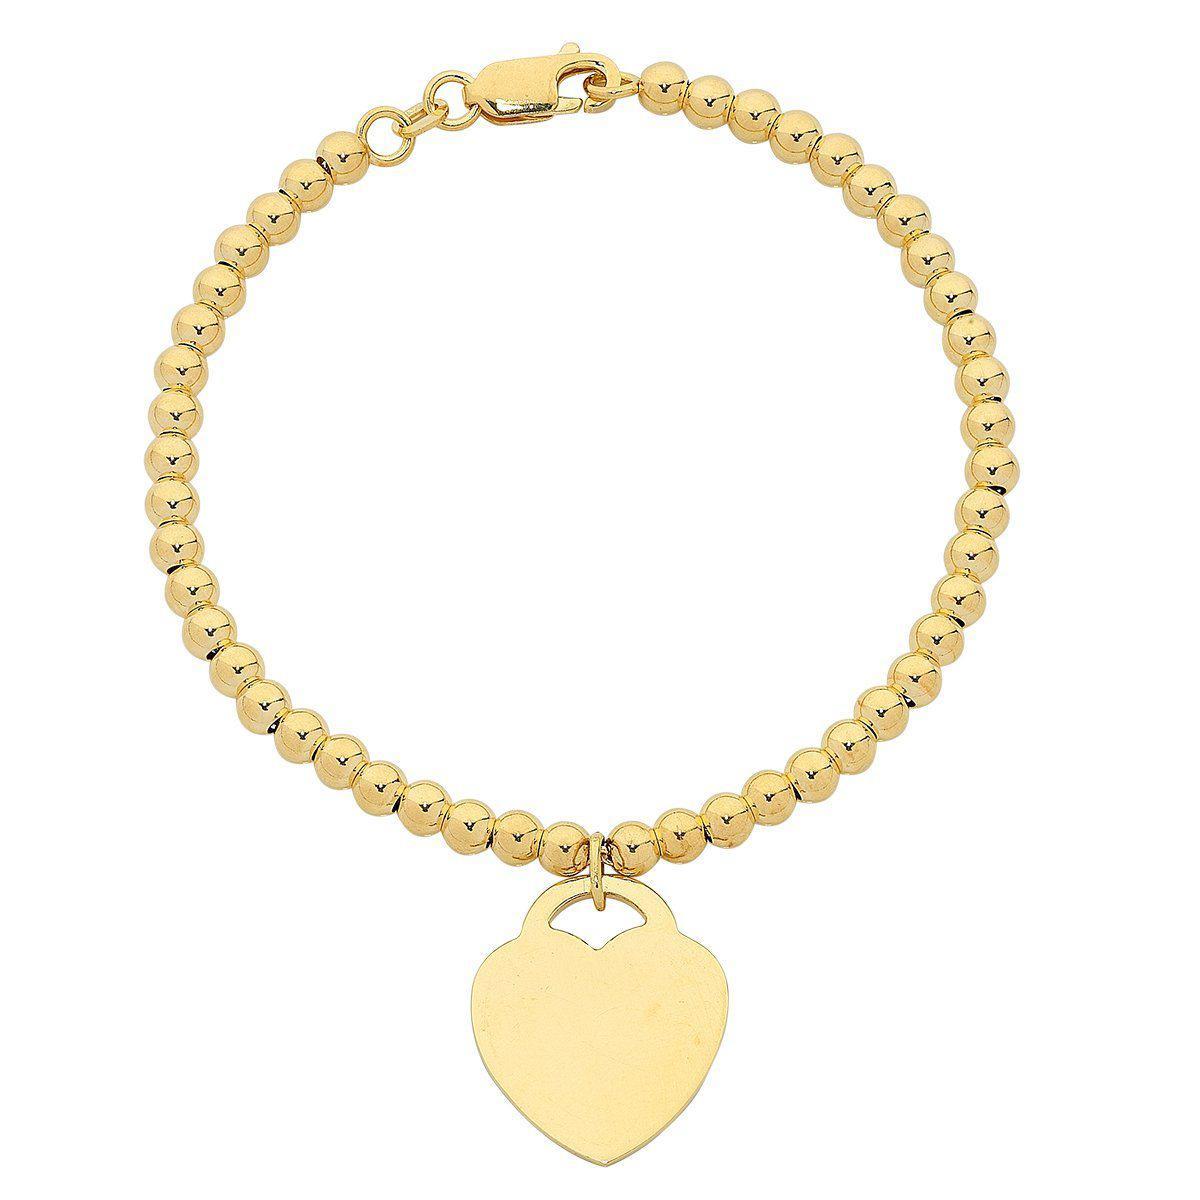 Bevilles 9ct Yellow Gold Silver Infused Bracelet with Heart Charm